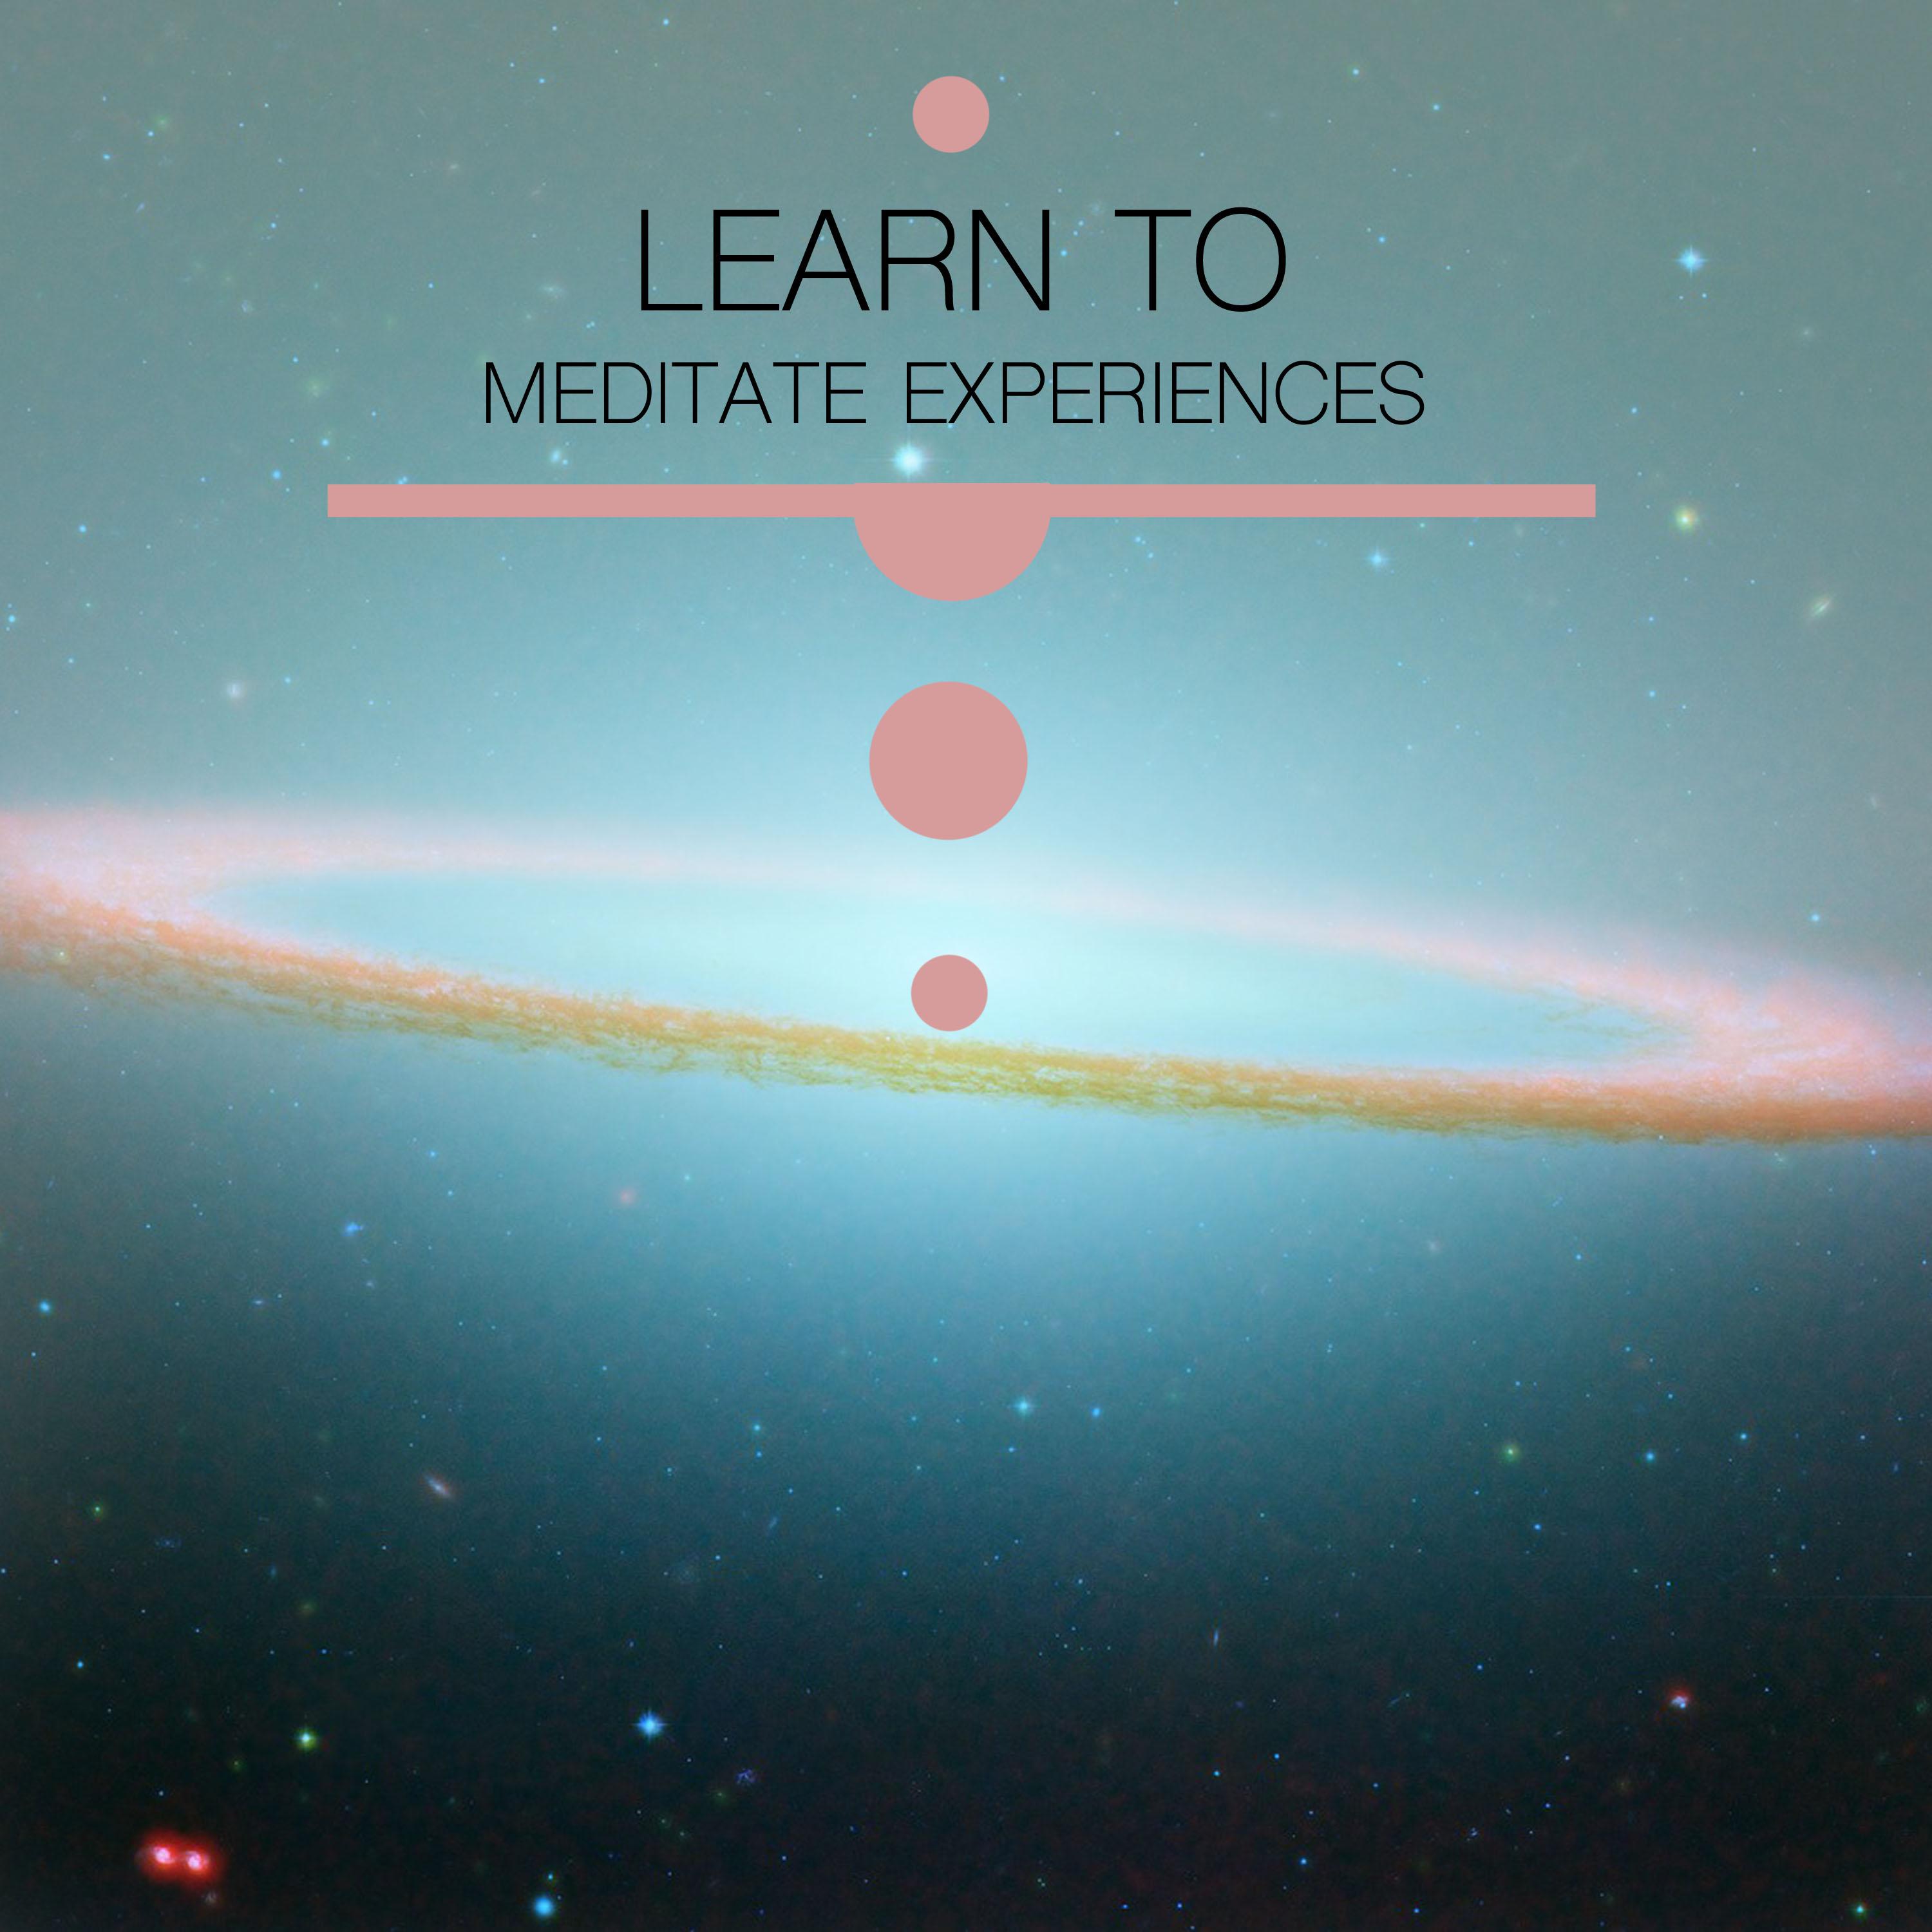 11 Learn to Meditate Experiences